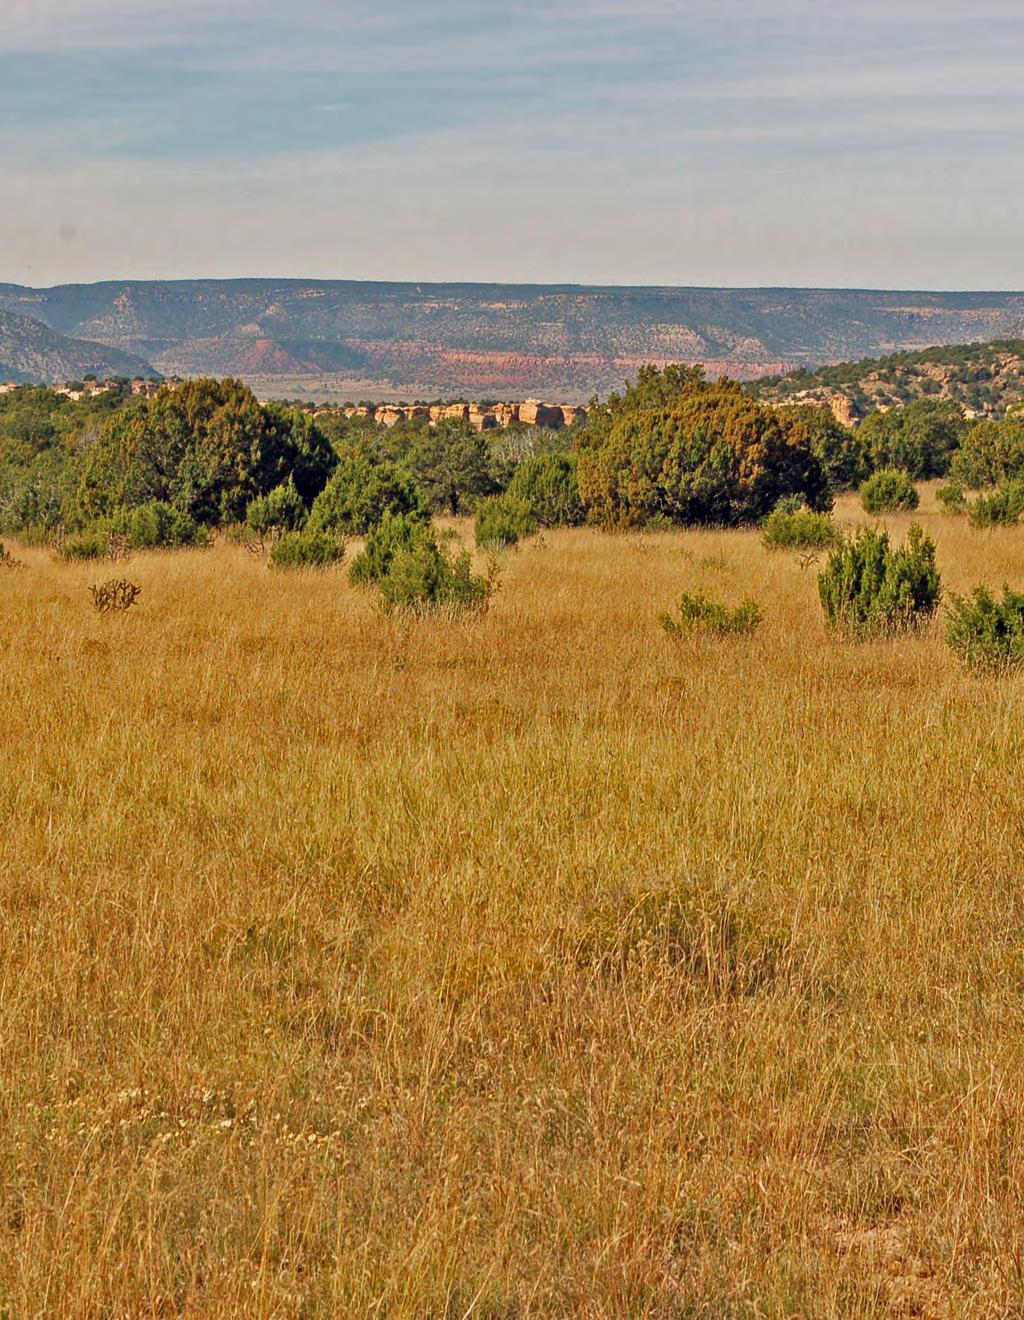 Deer Canyon Ranch 5,469 +/- Deeded Acres, 640 Acres NM State Lease, 6,109 Total Acres+/- Harding and San Miguel Counties, New